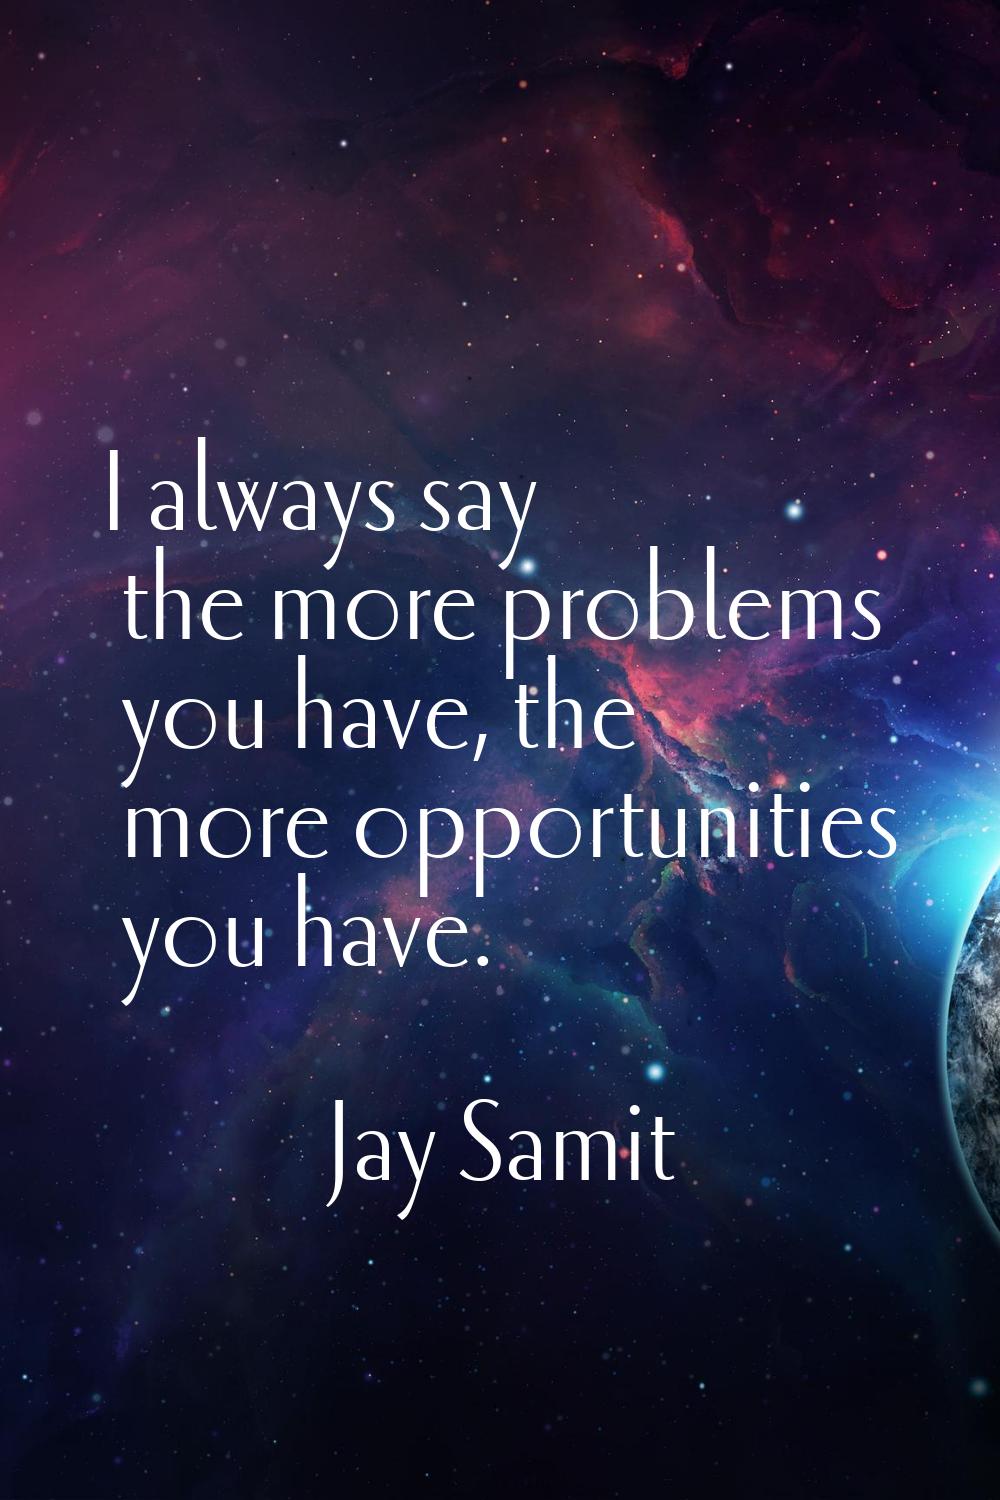 I always say the more problems you have, the more opportunities you have.